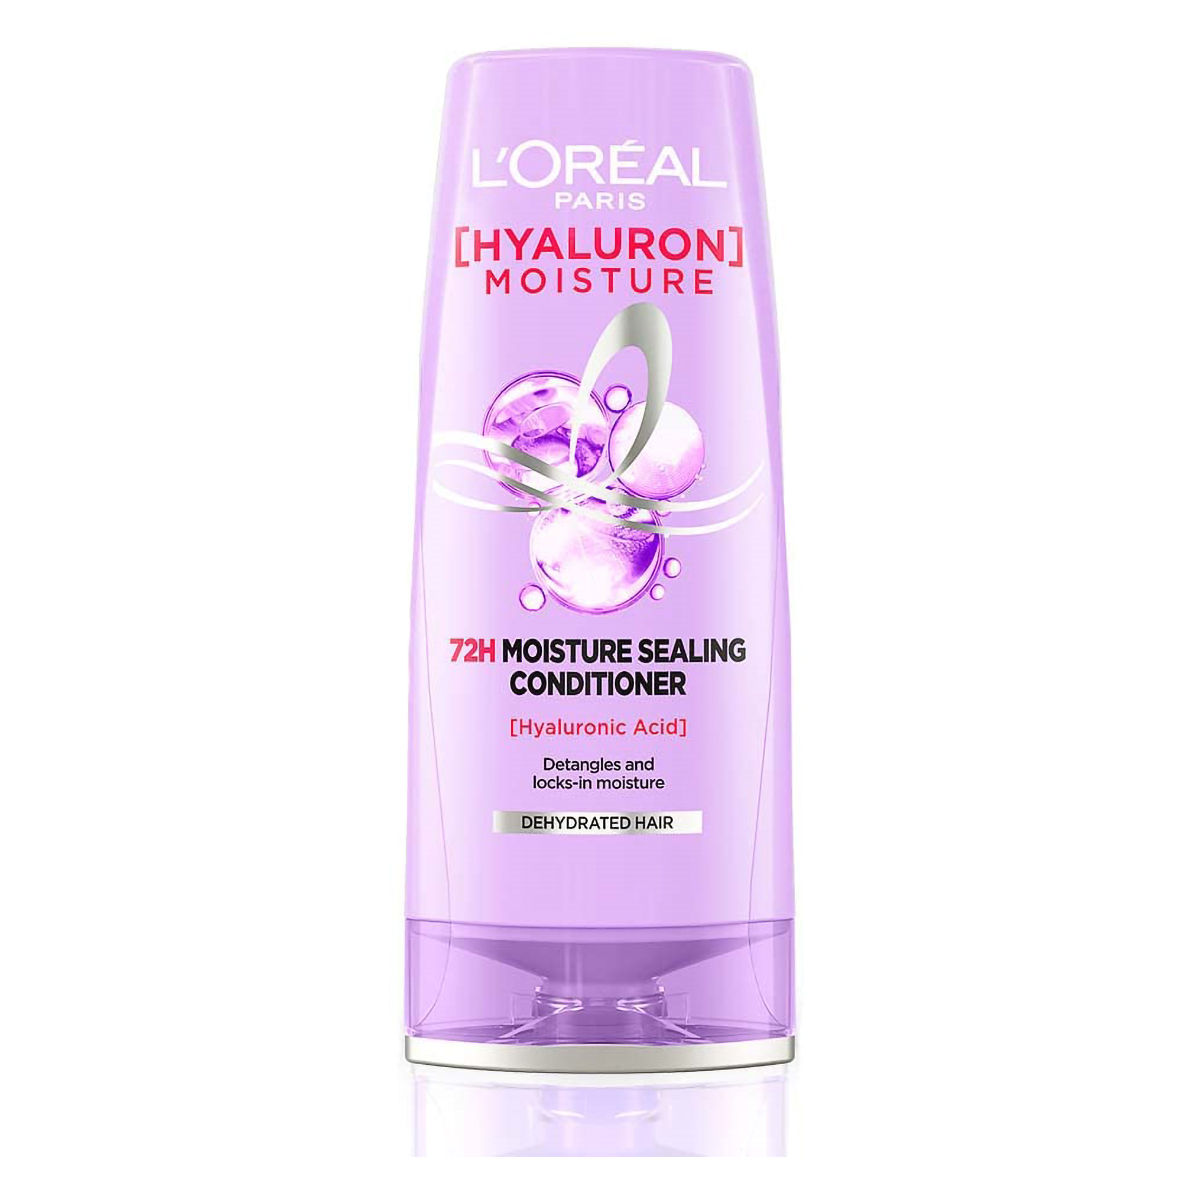 l-oreal-paris-hyaluron-moisture-72h-moisture-sealing-conditioner-71-5-ml-price-uses-side